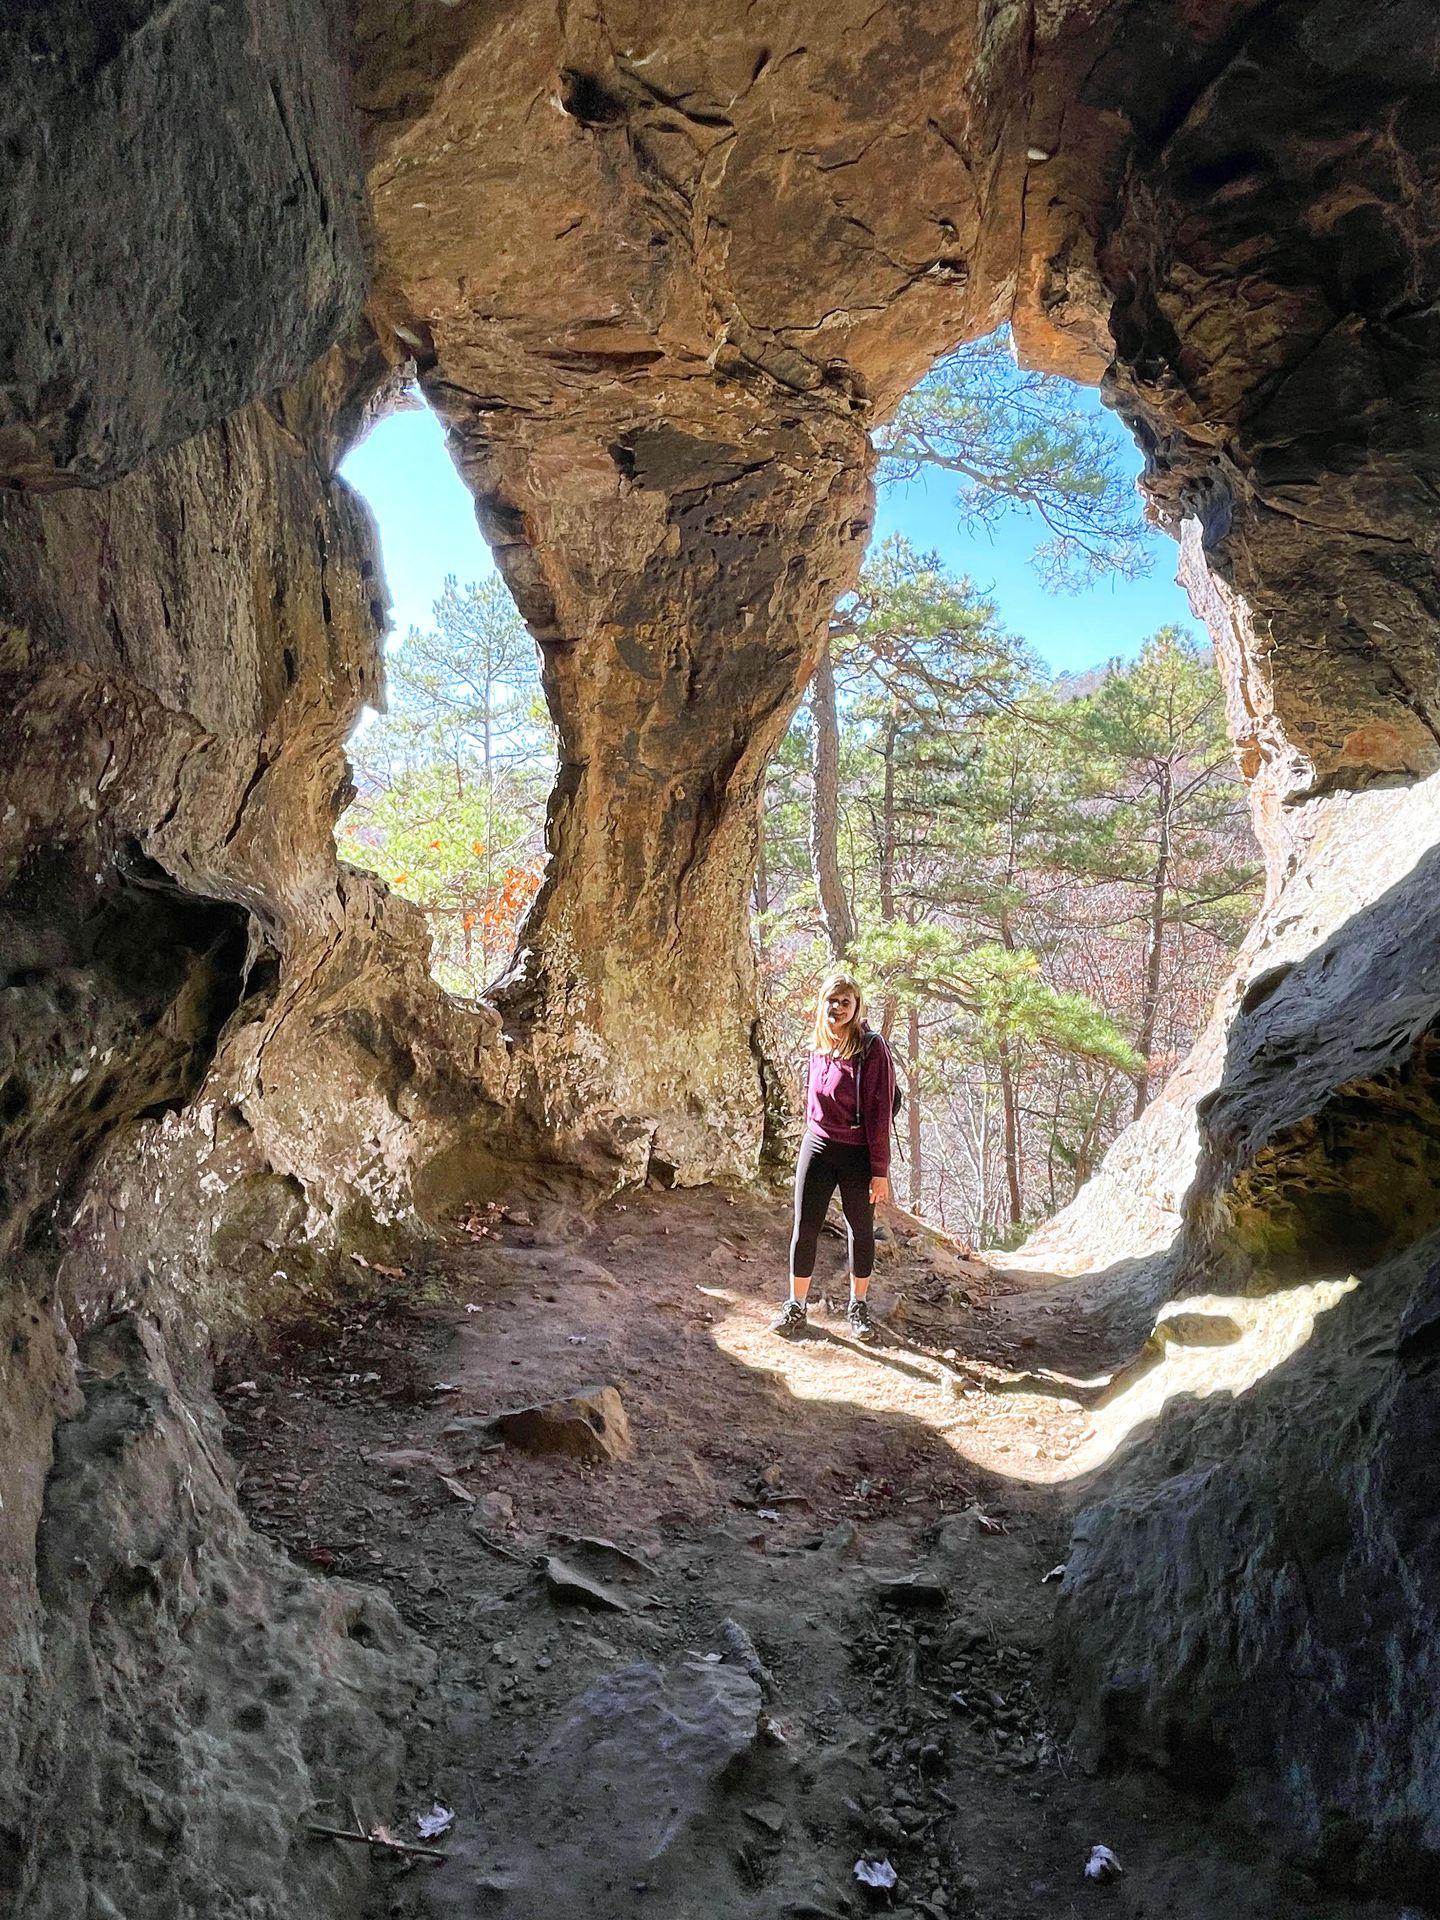 Lydia standing in a cave with two rock arch openings behind her.